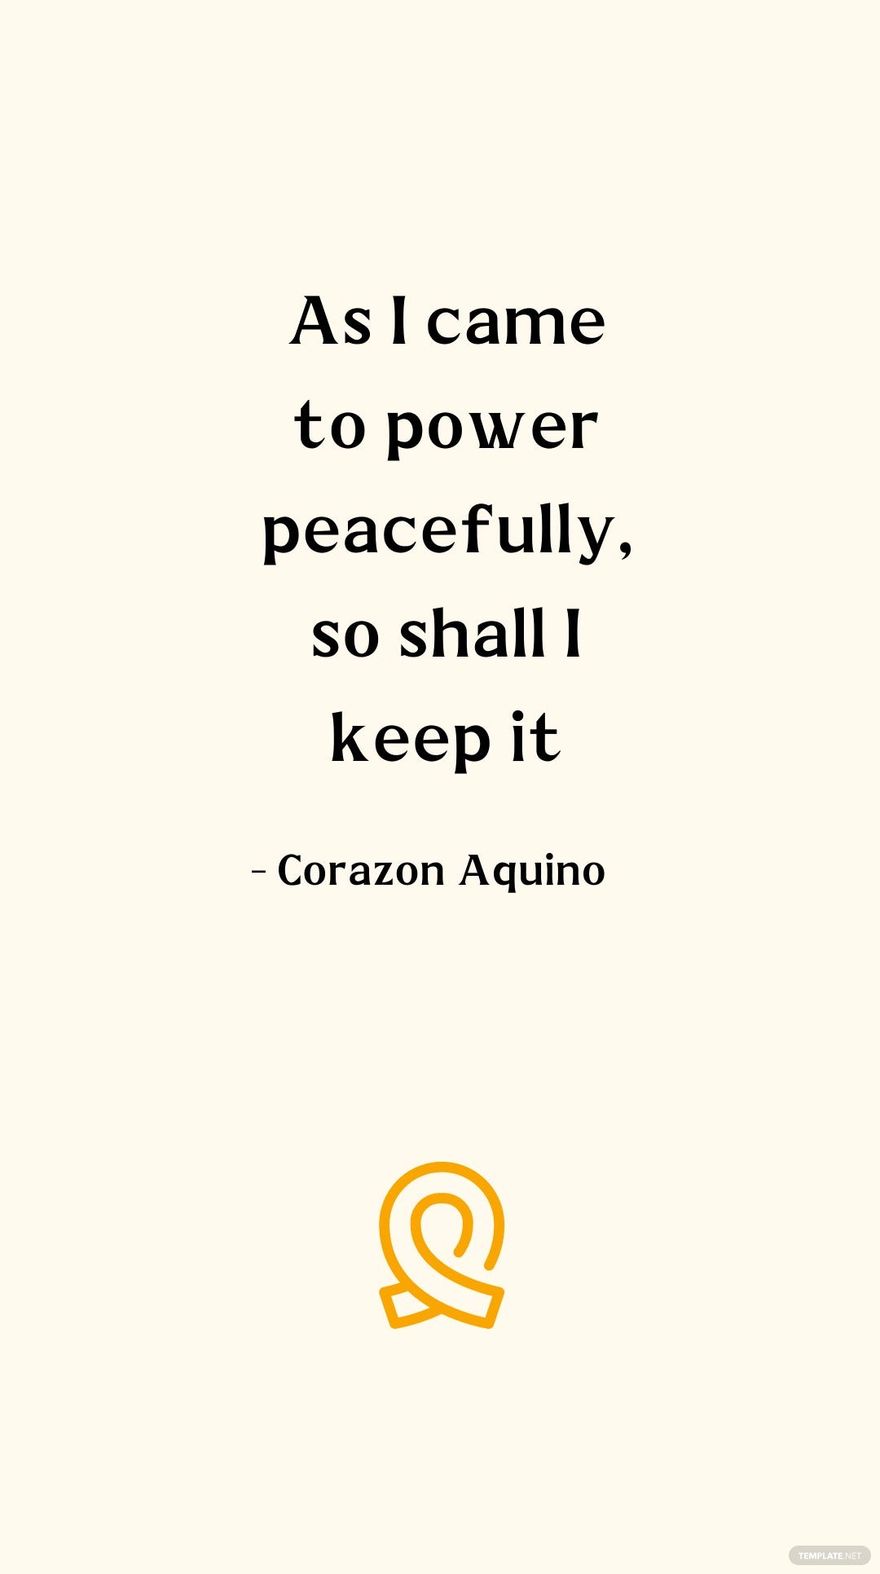 Corazon Aquino - As I came to power peacefully, so shall I keep it in JPG